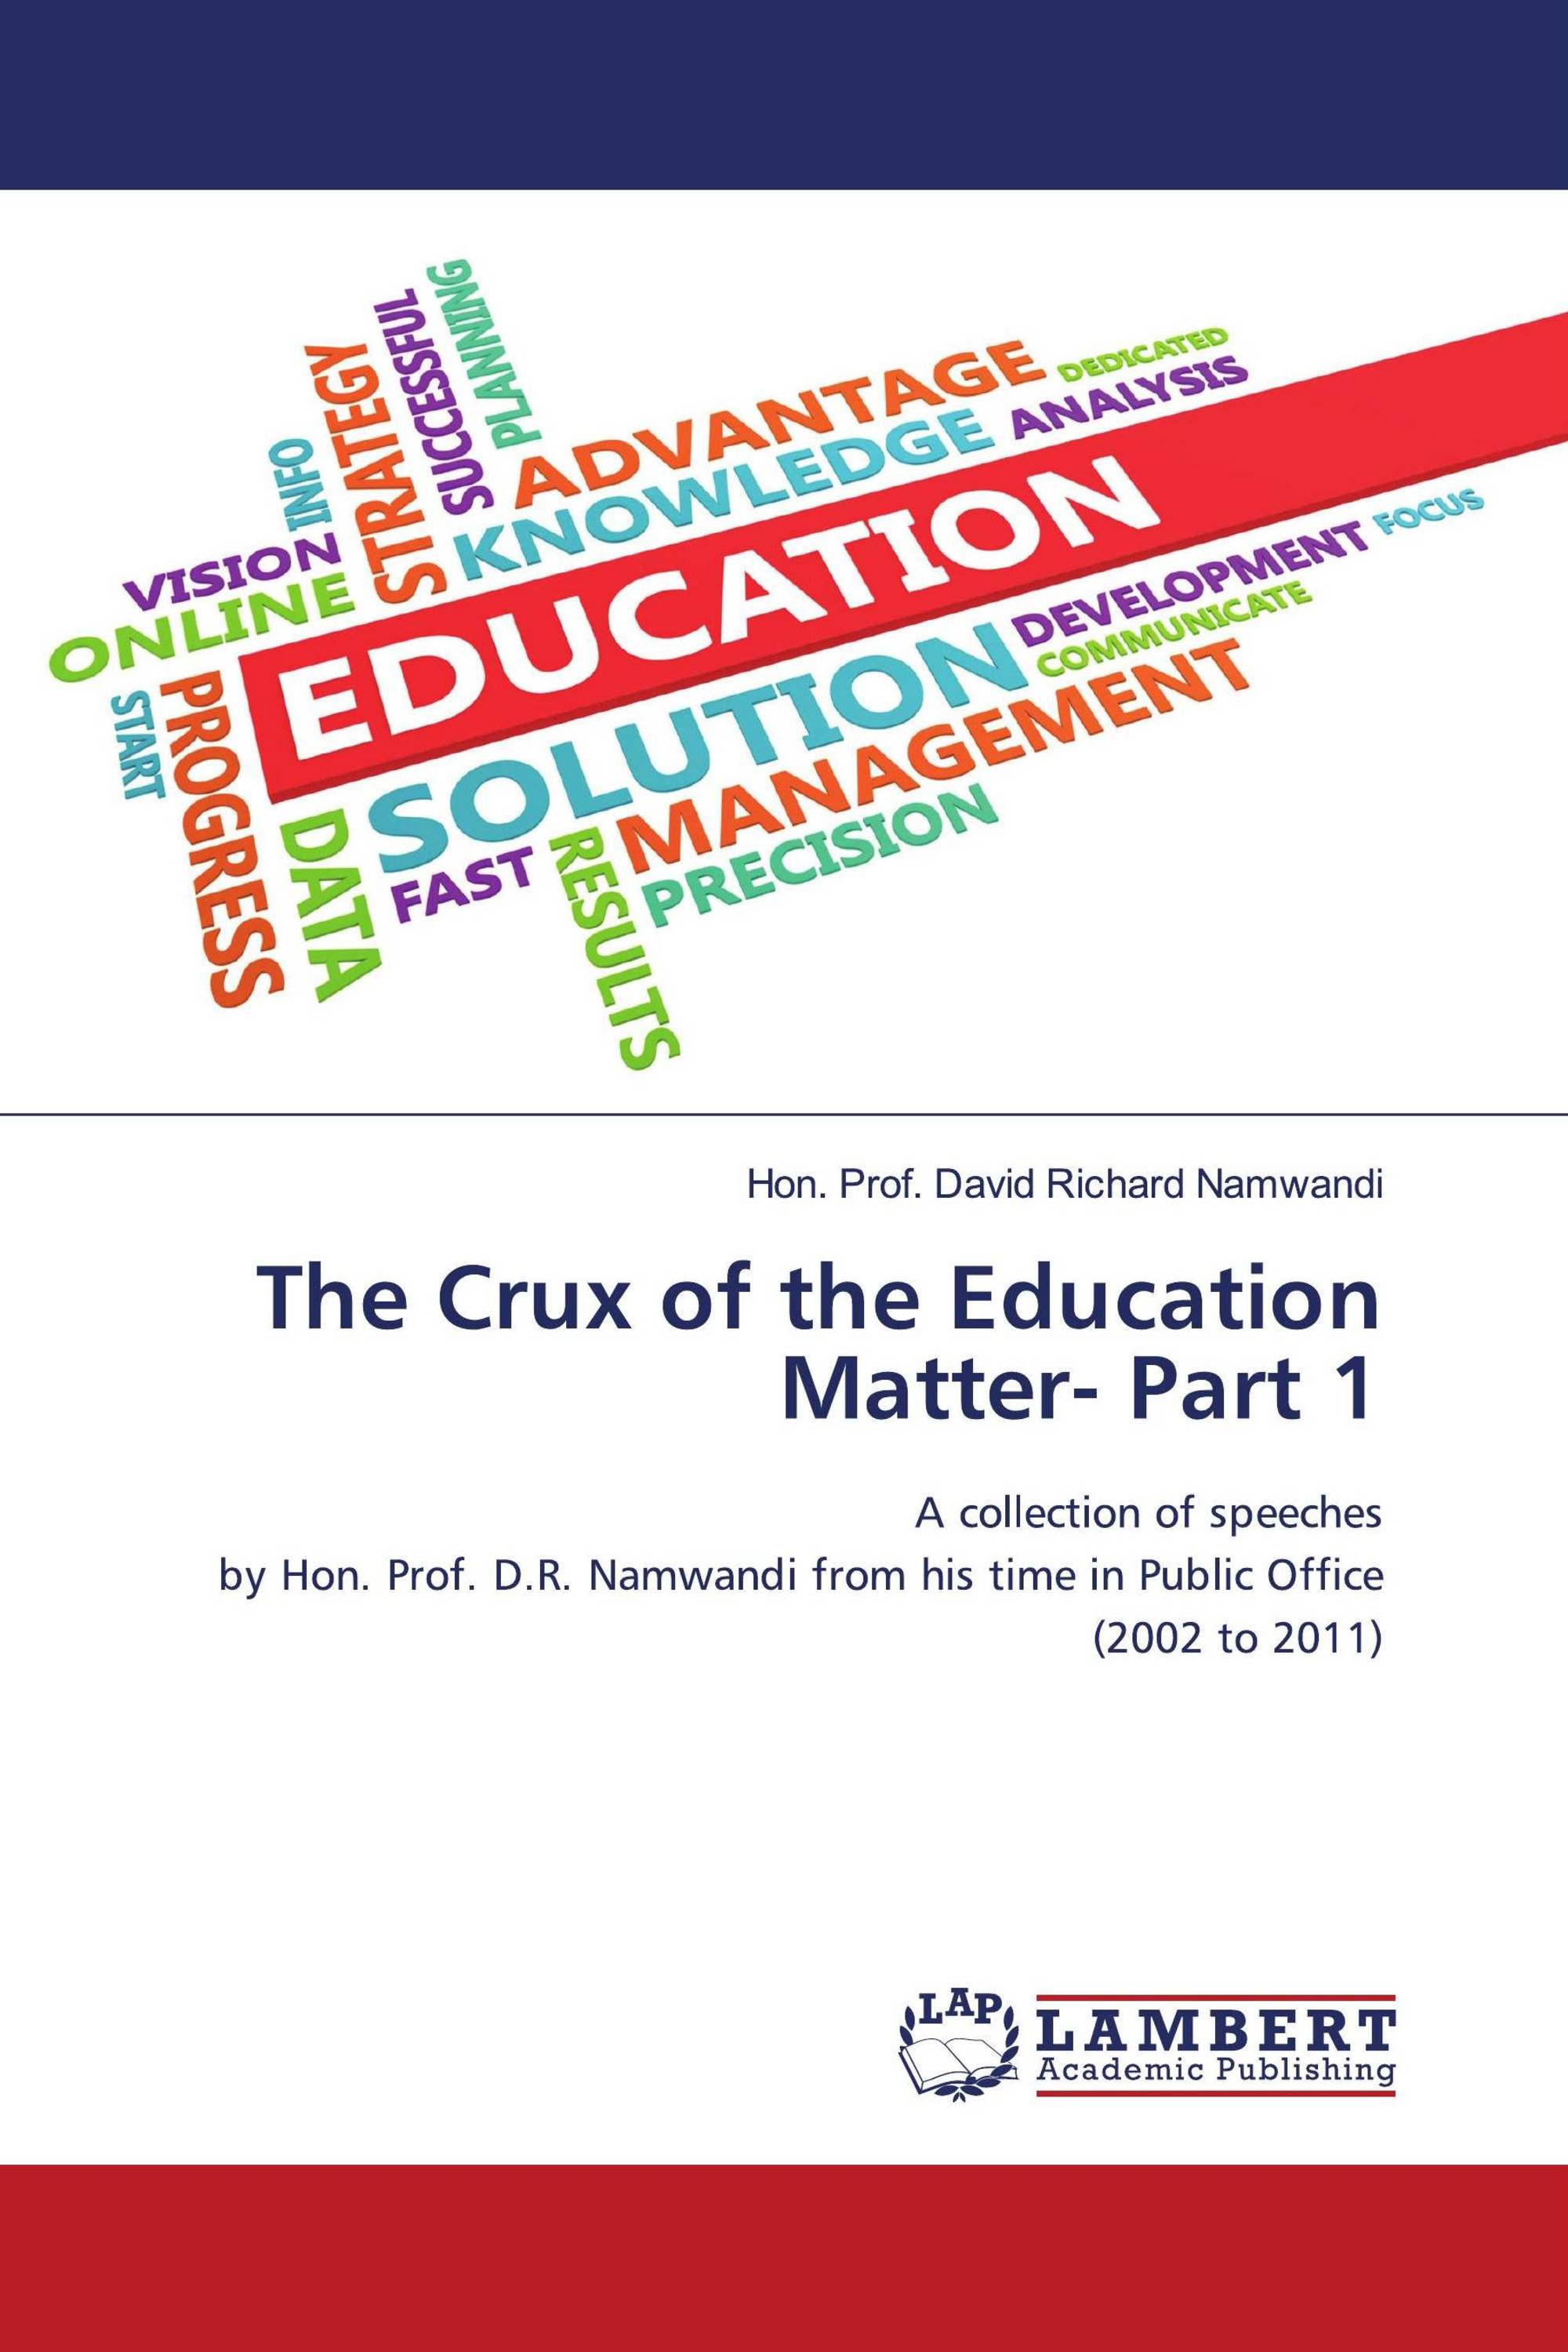 The crux of the education matter - Part 1